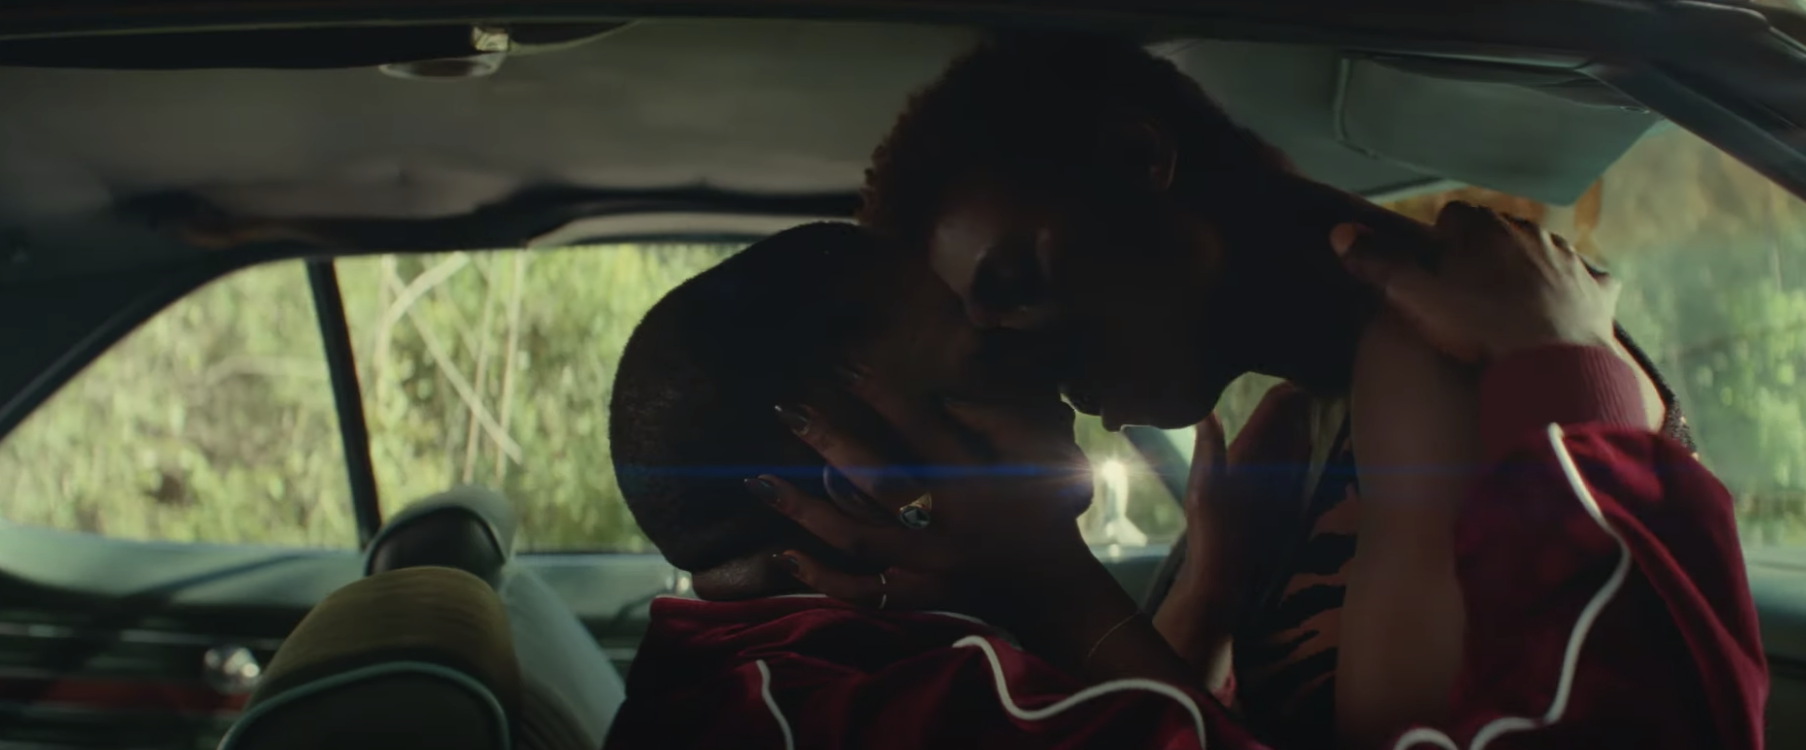 Daniel Kaluuya and Jodie Turner-Smith having sex in a car in &quot;Queen &amp;amp; Slim&quot;